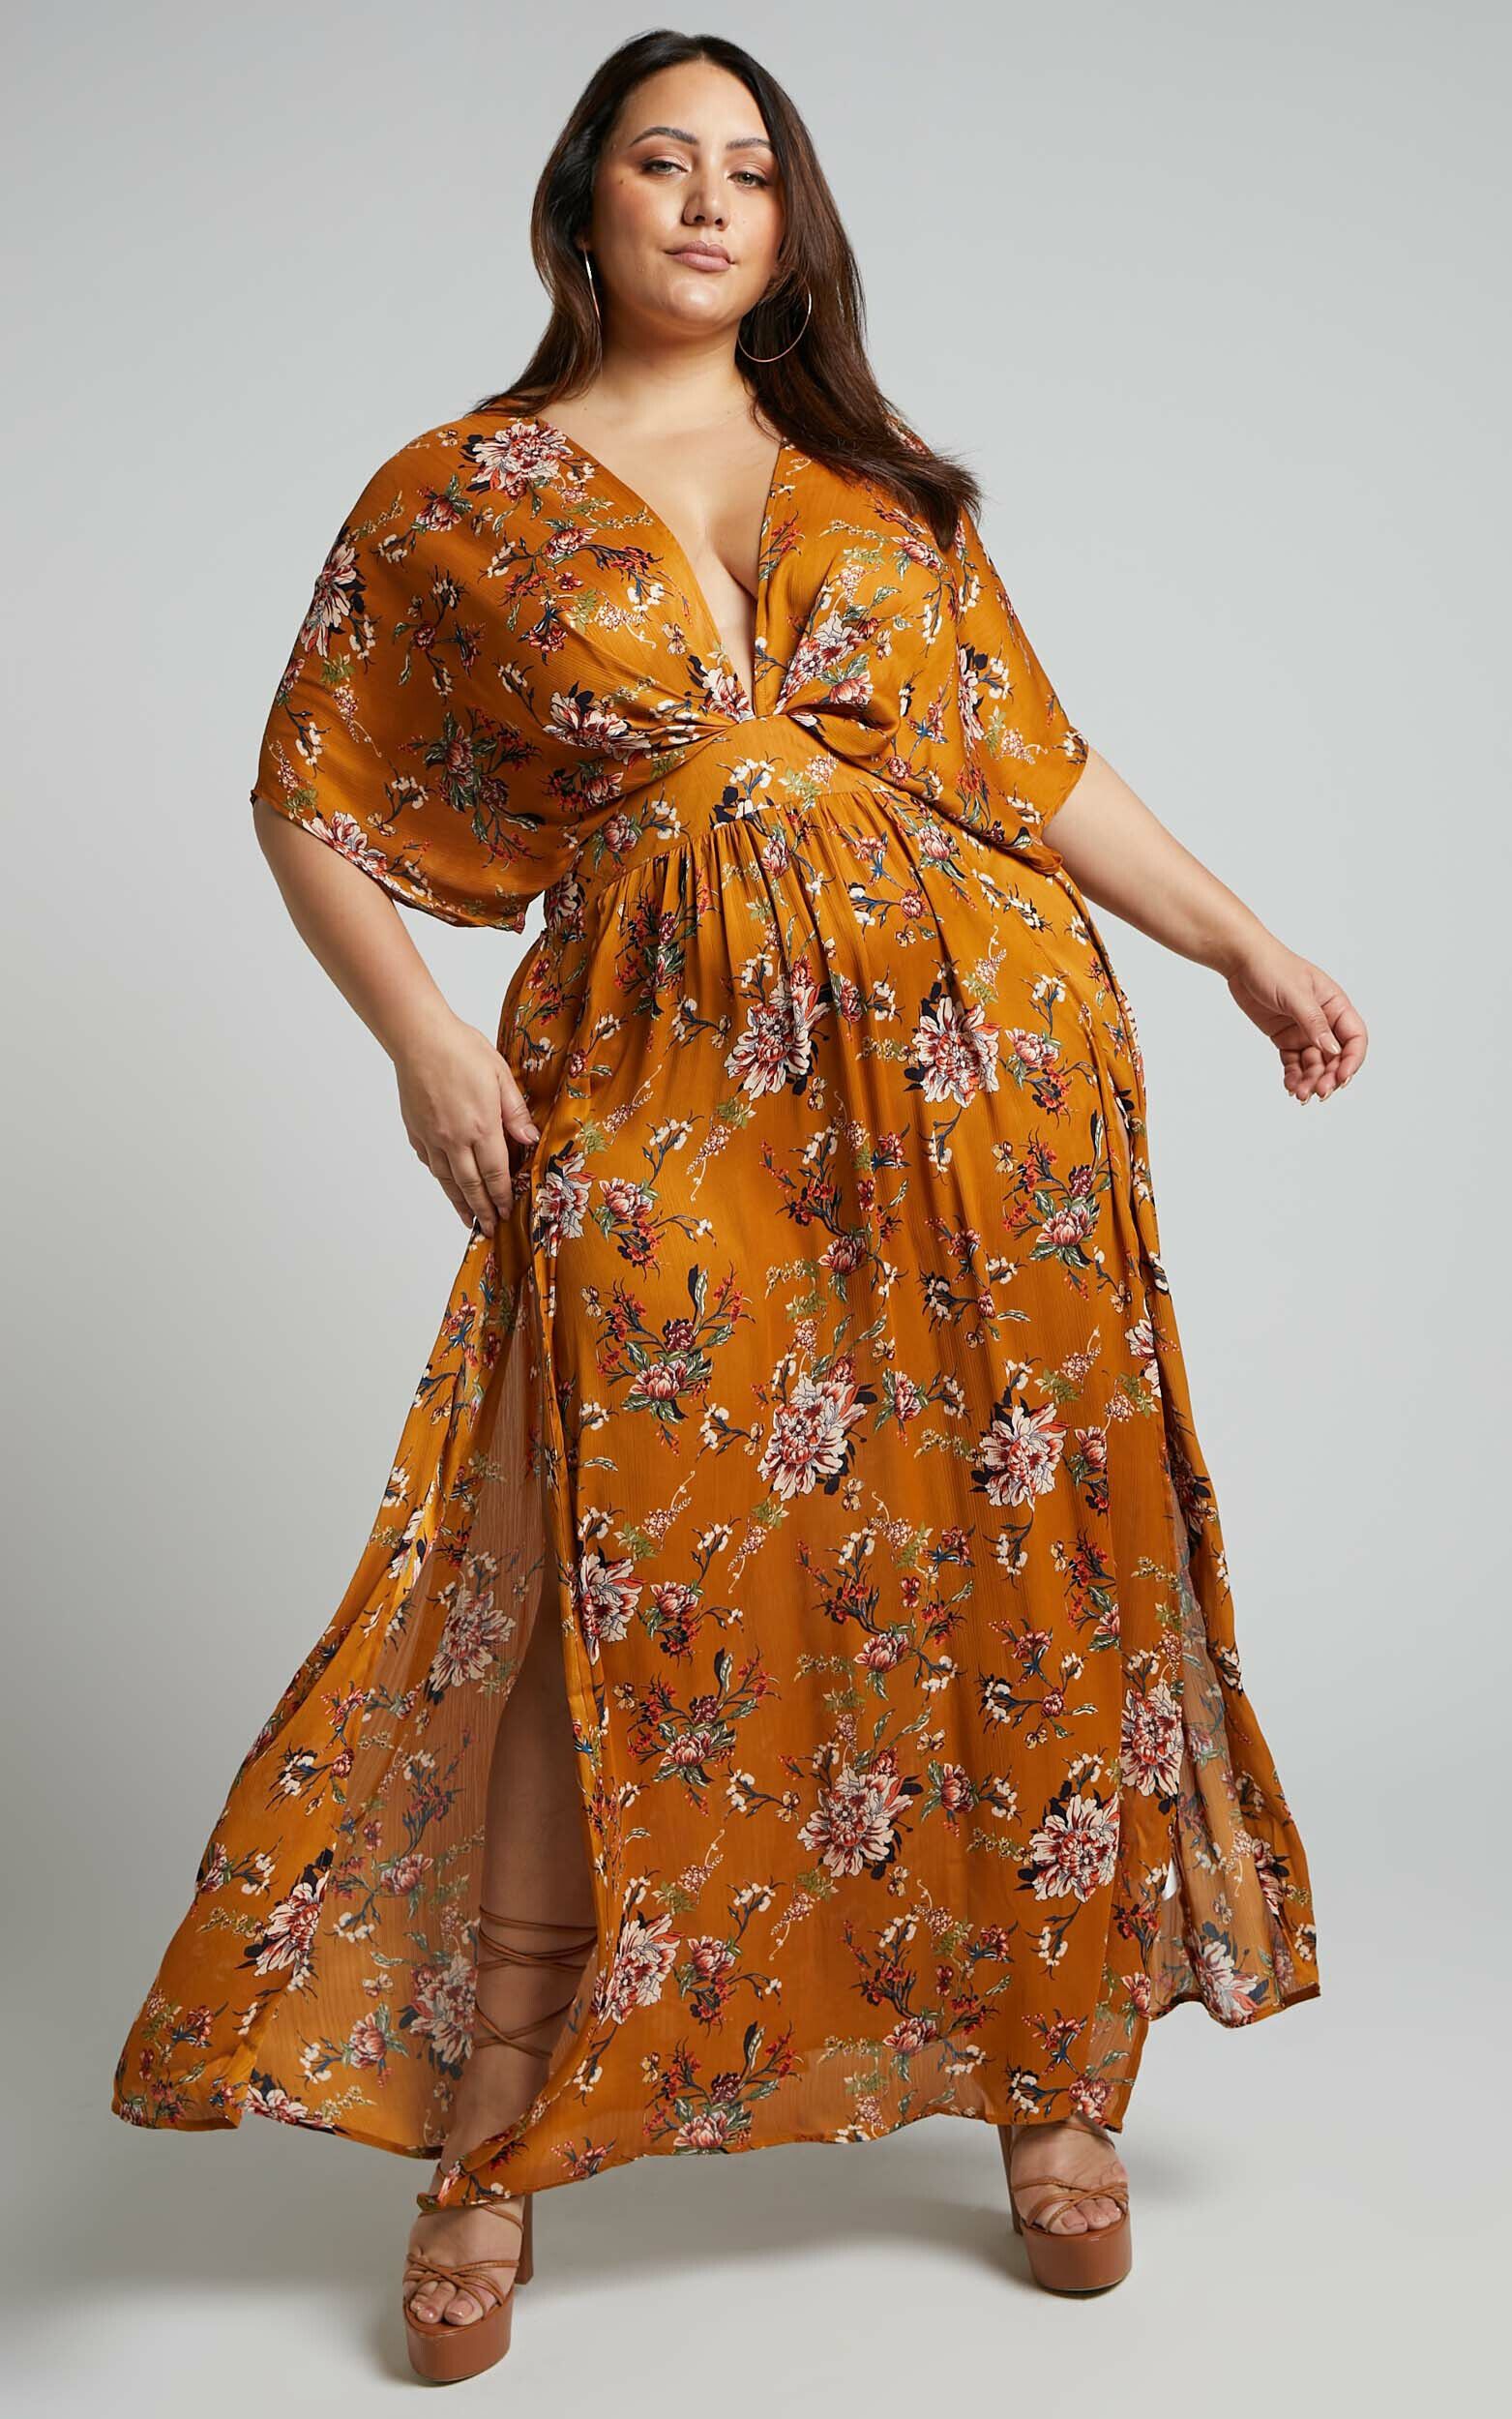 Vacay Ready Midaxi Dress - Plunge Thigh Split Dress in Mustard Floral ...